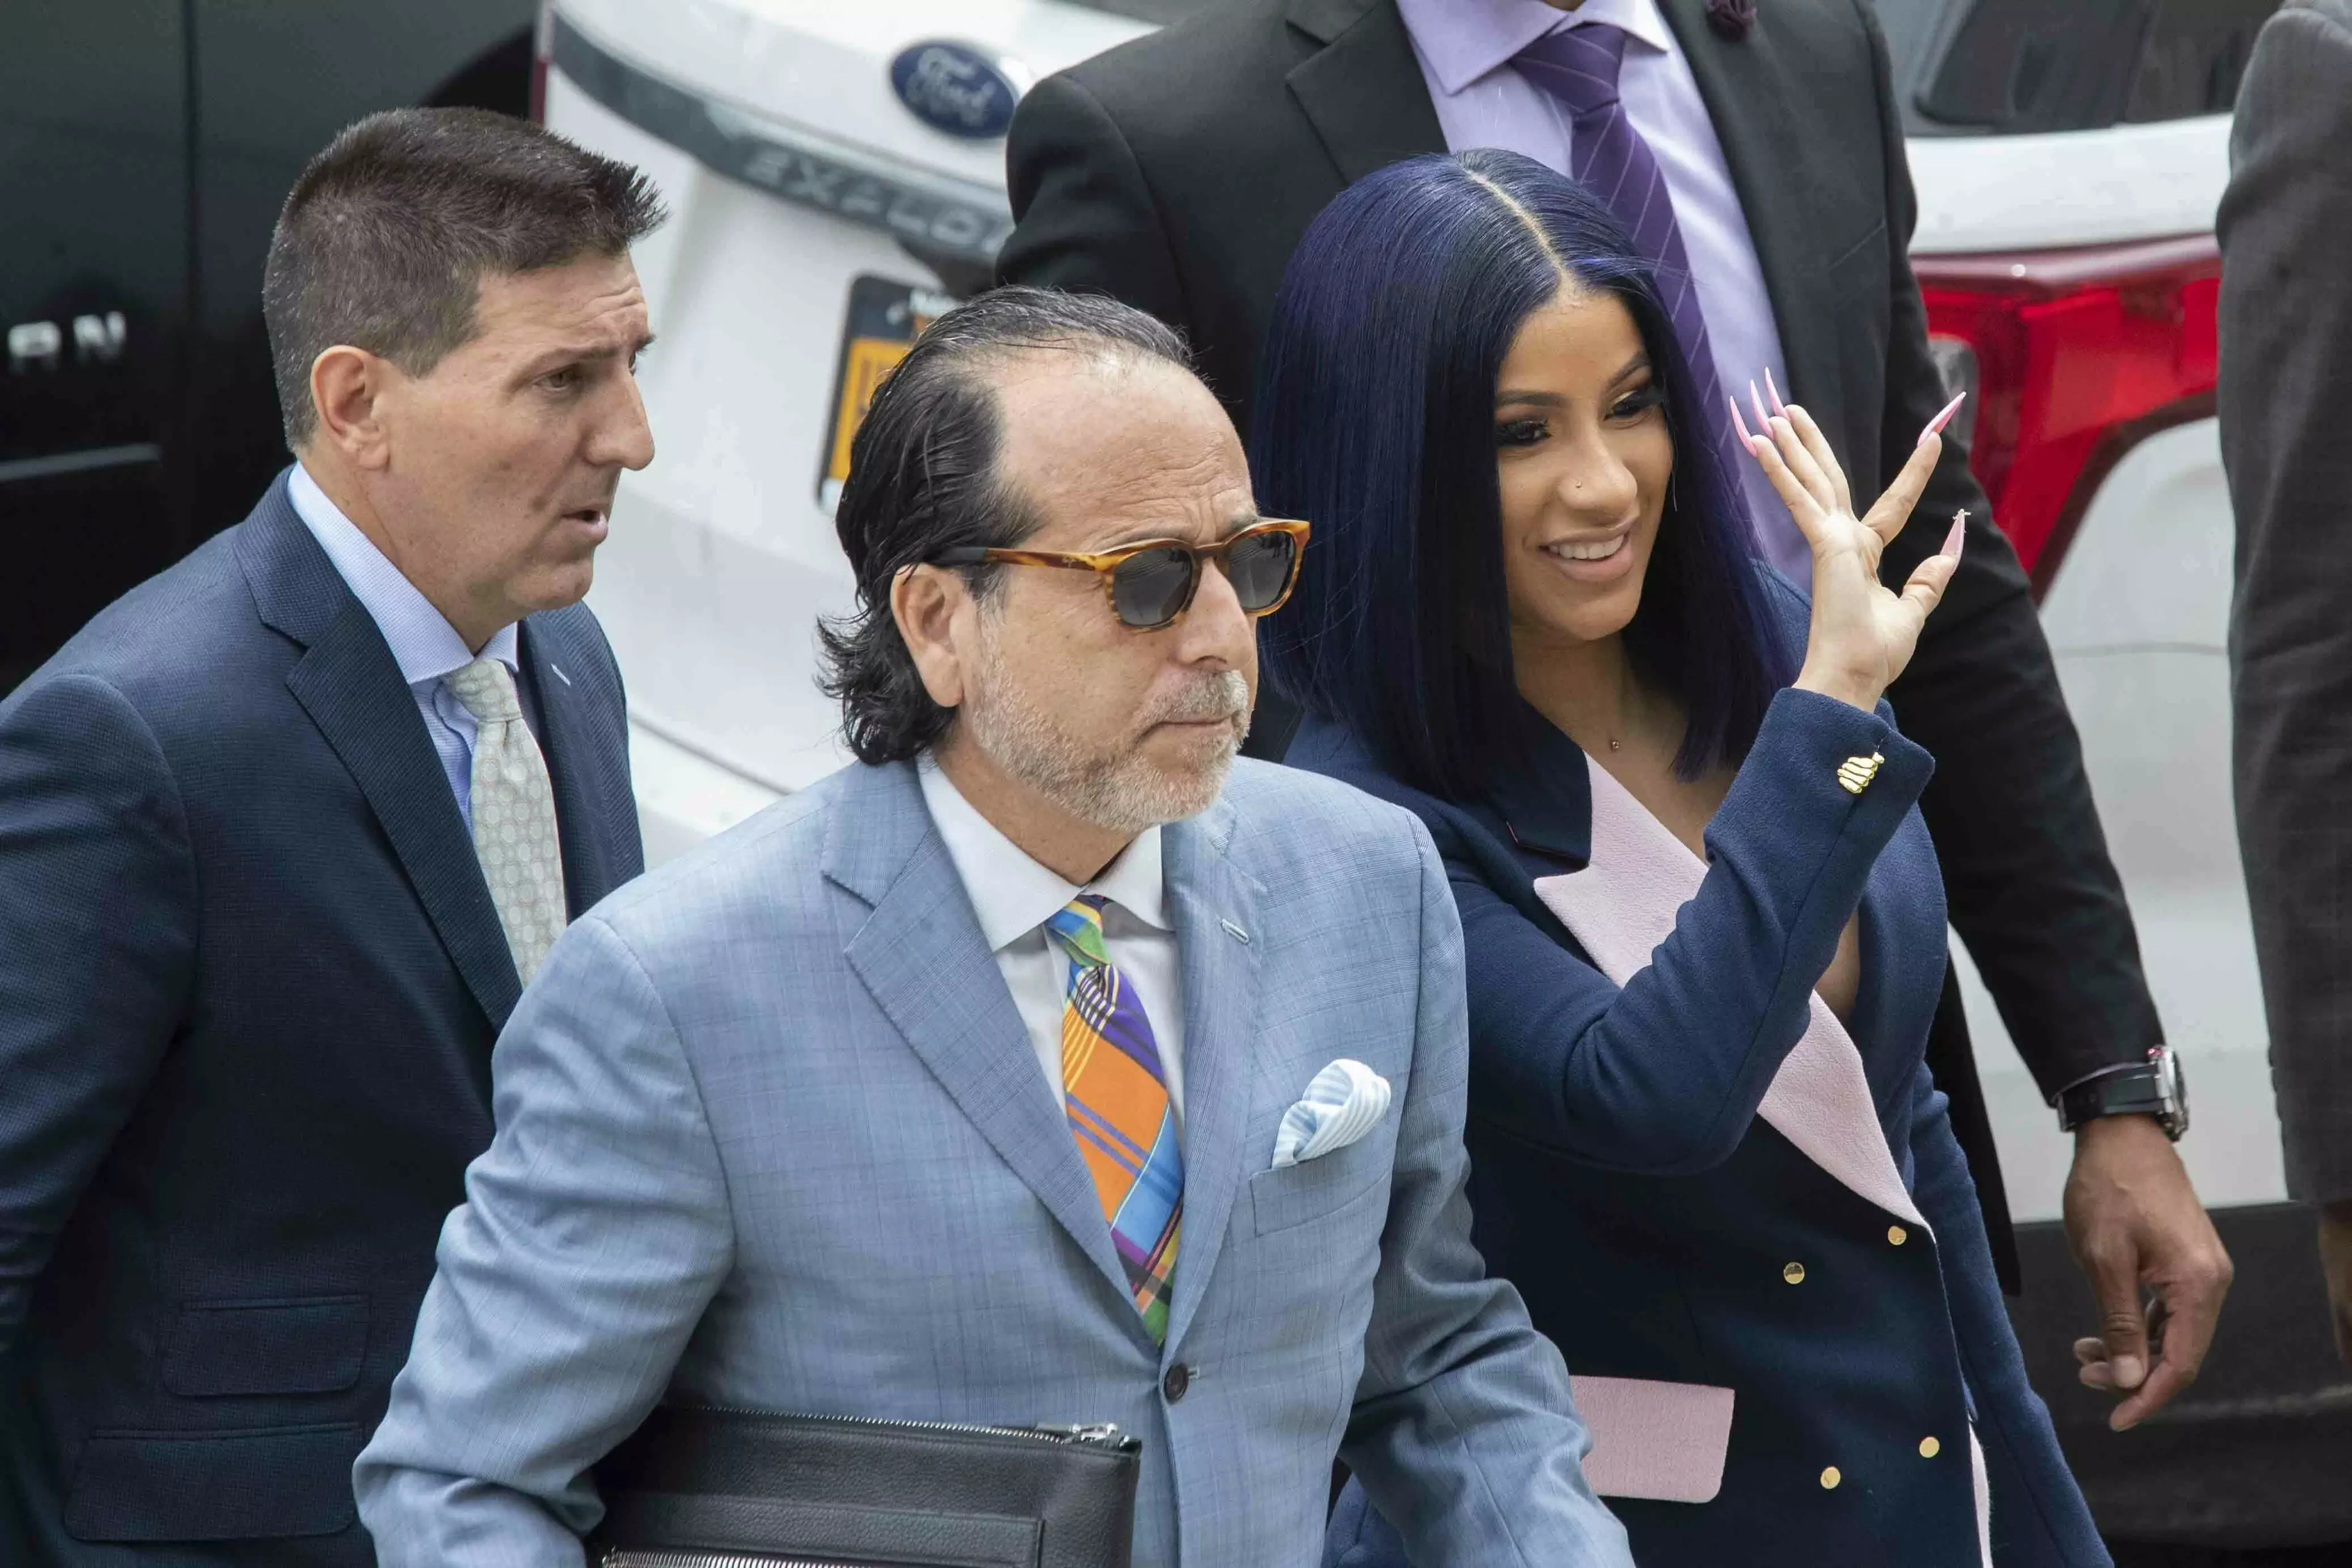 Cardi B waves at fans as she arrives for a hearing at Queens County Criminal Court